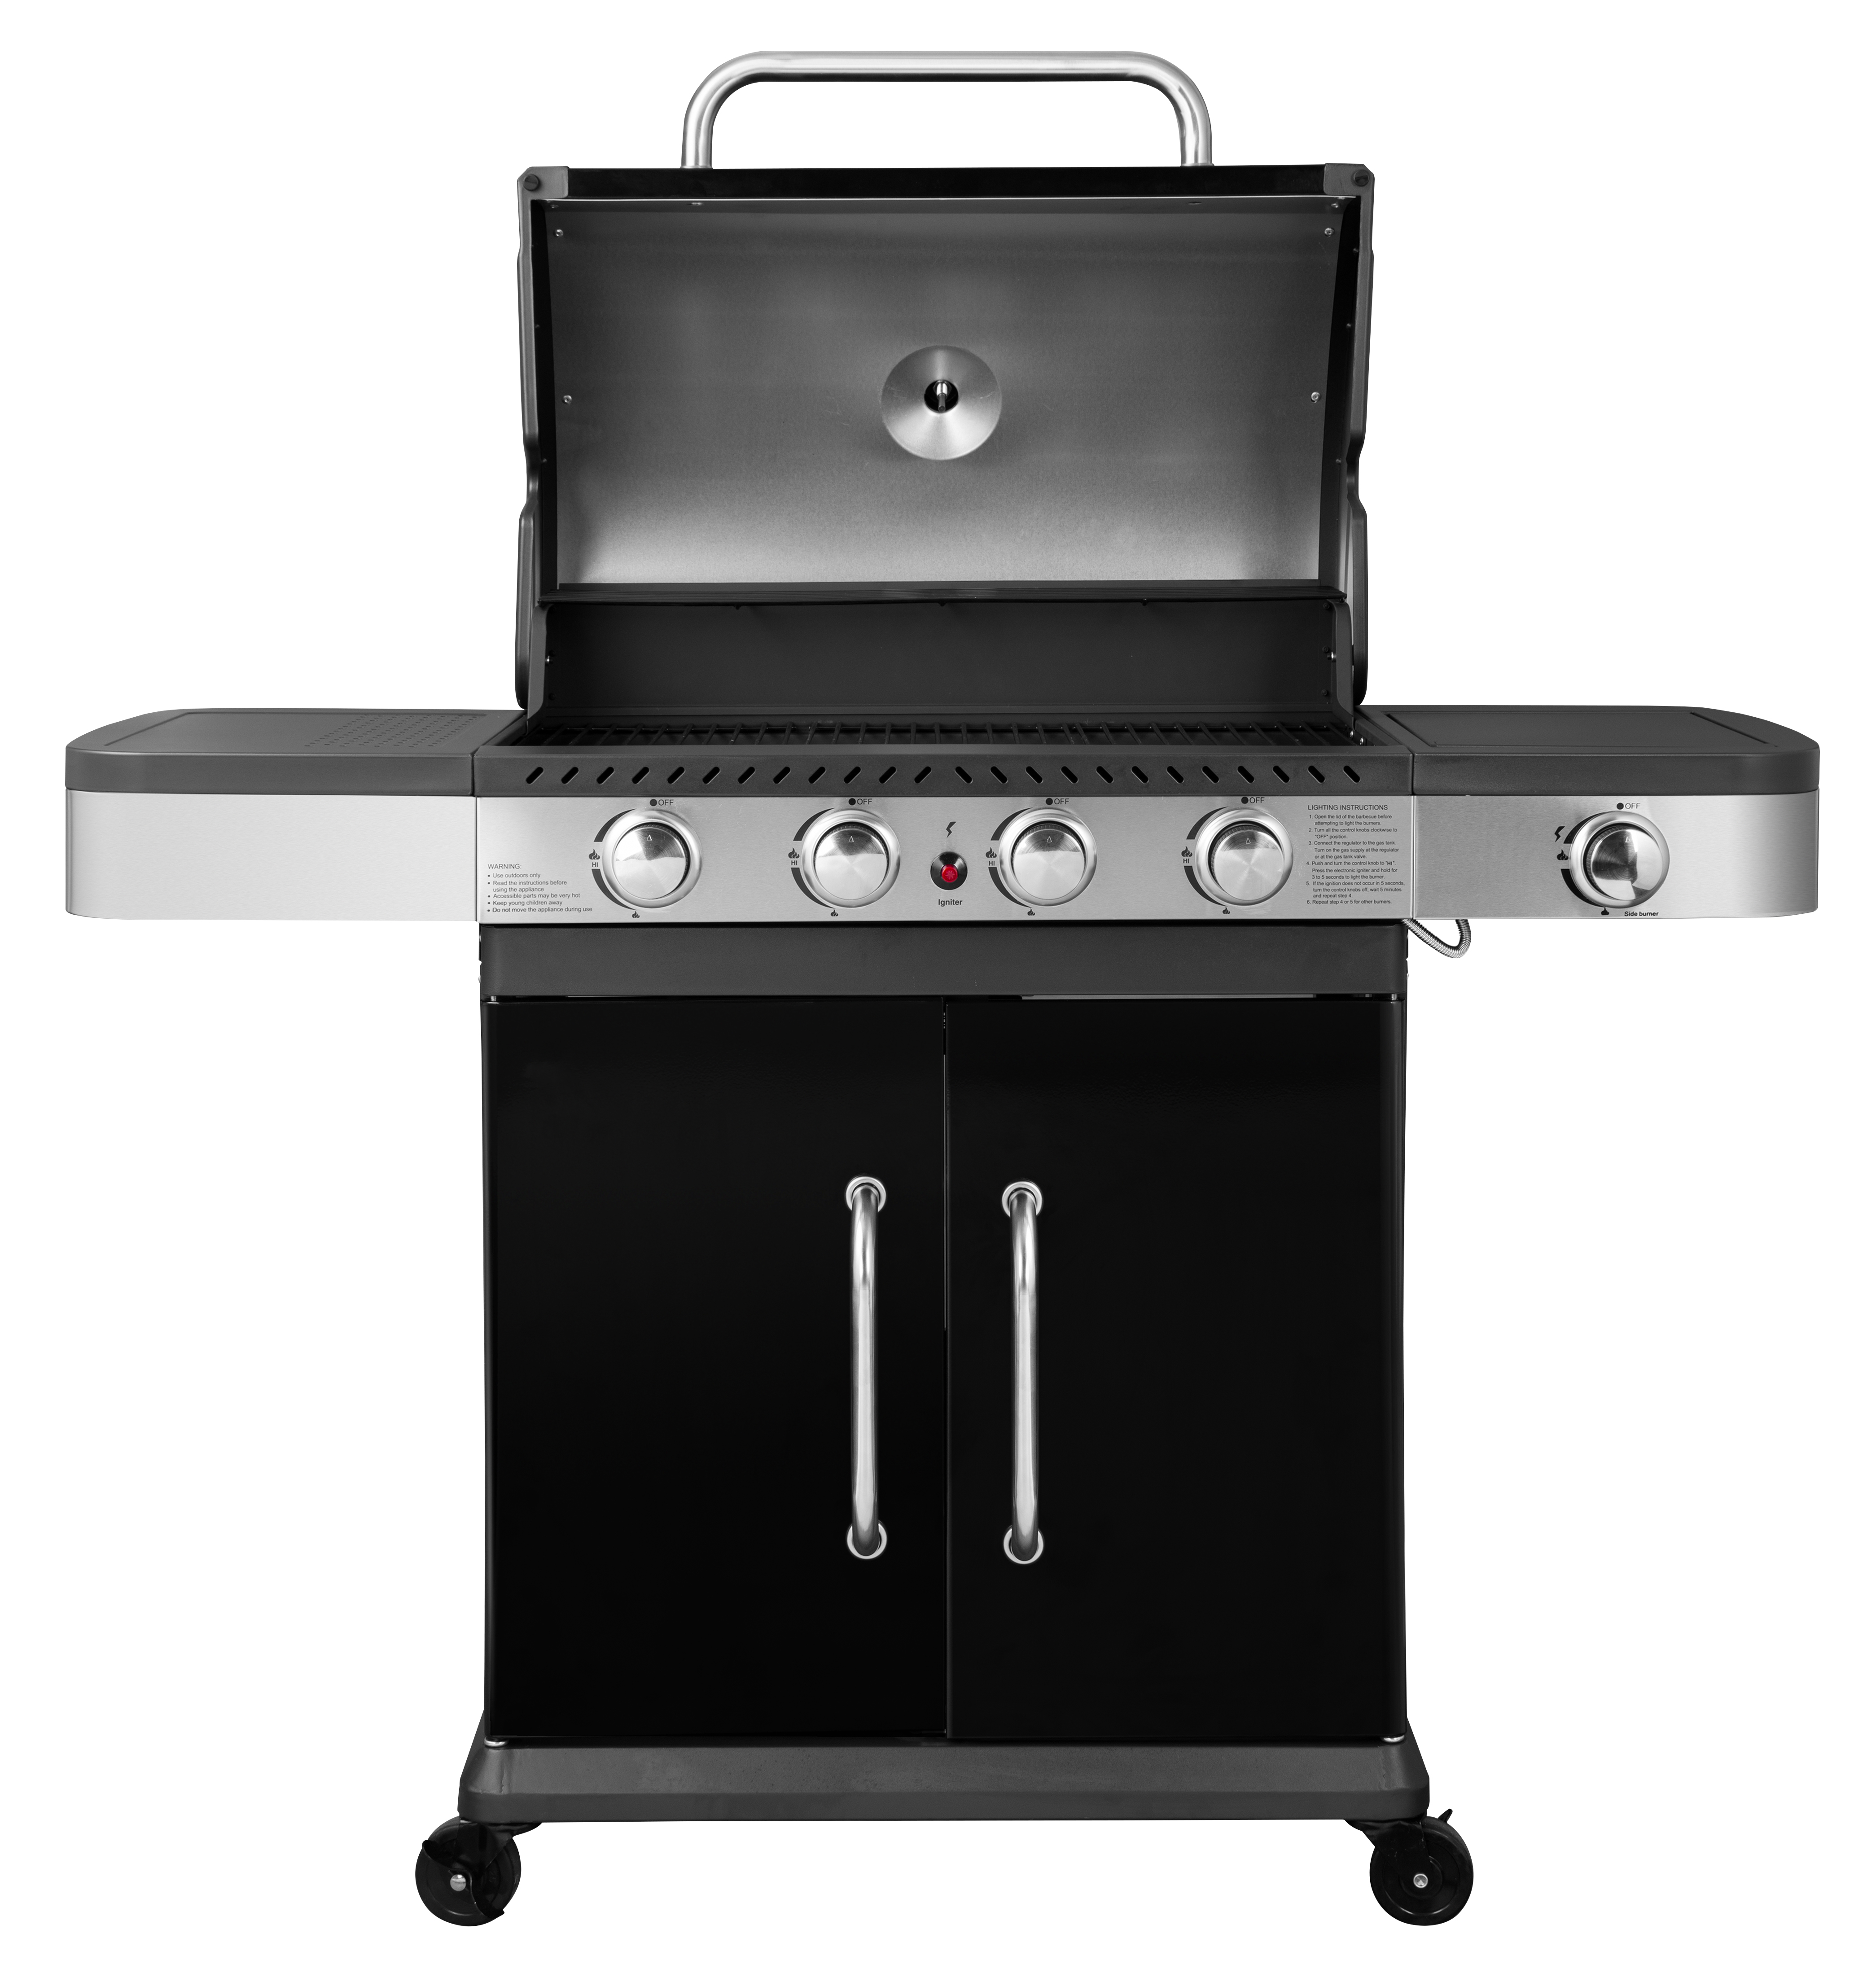 Gas Barbeque Premium with 4 Burners and a side cob Unimac - 2